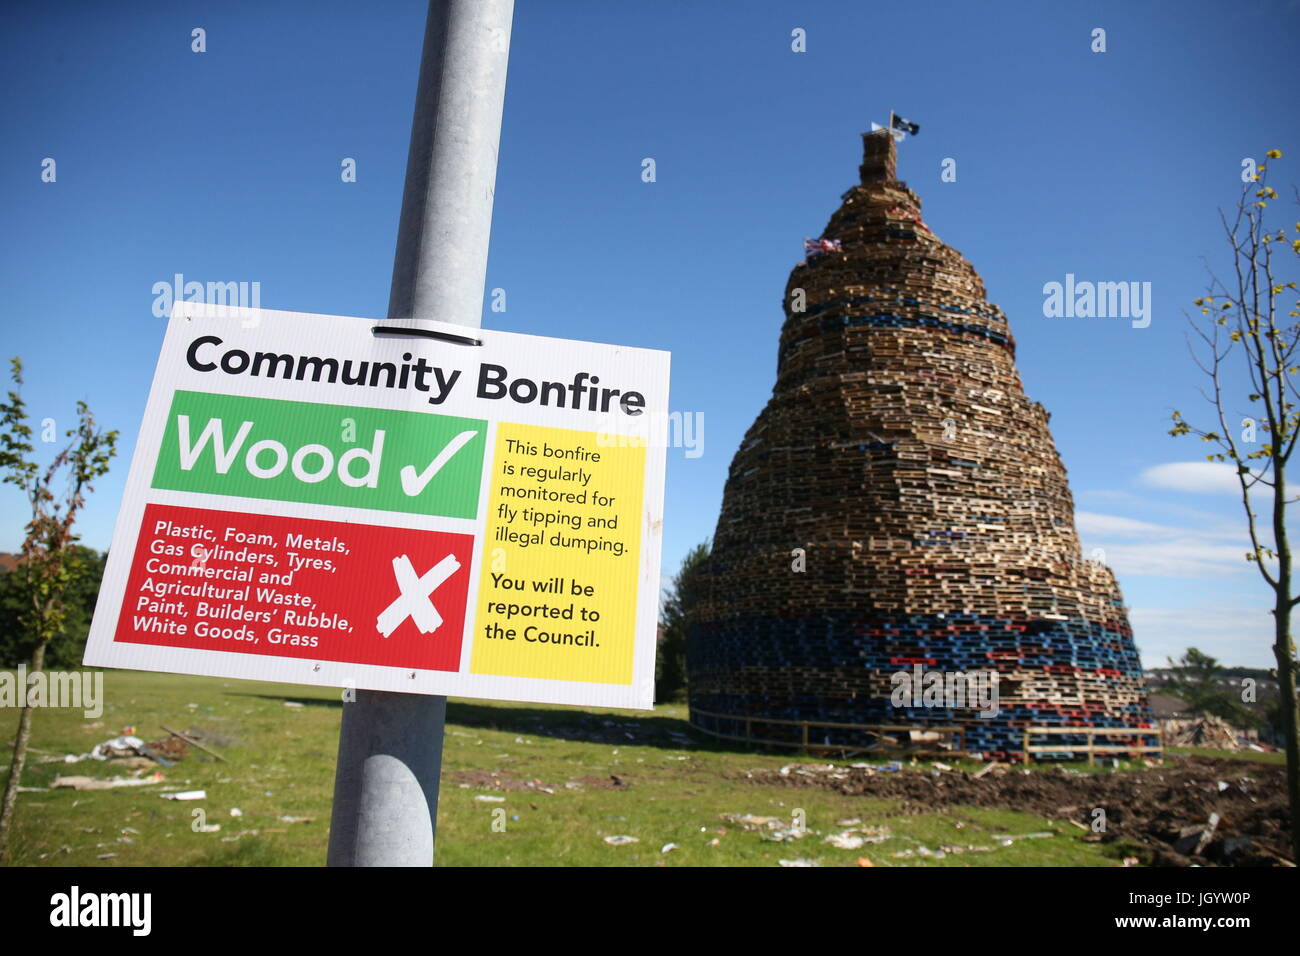 A bonfire in Kilcooley, Bangor, ahead of the key date in the protestant loyal order marching season - the Twelfth of July. Stock Photo